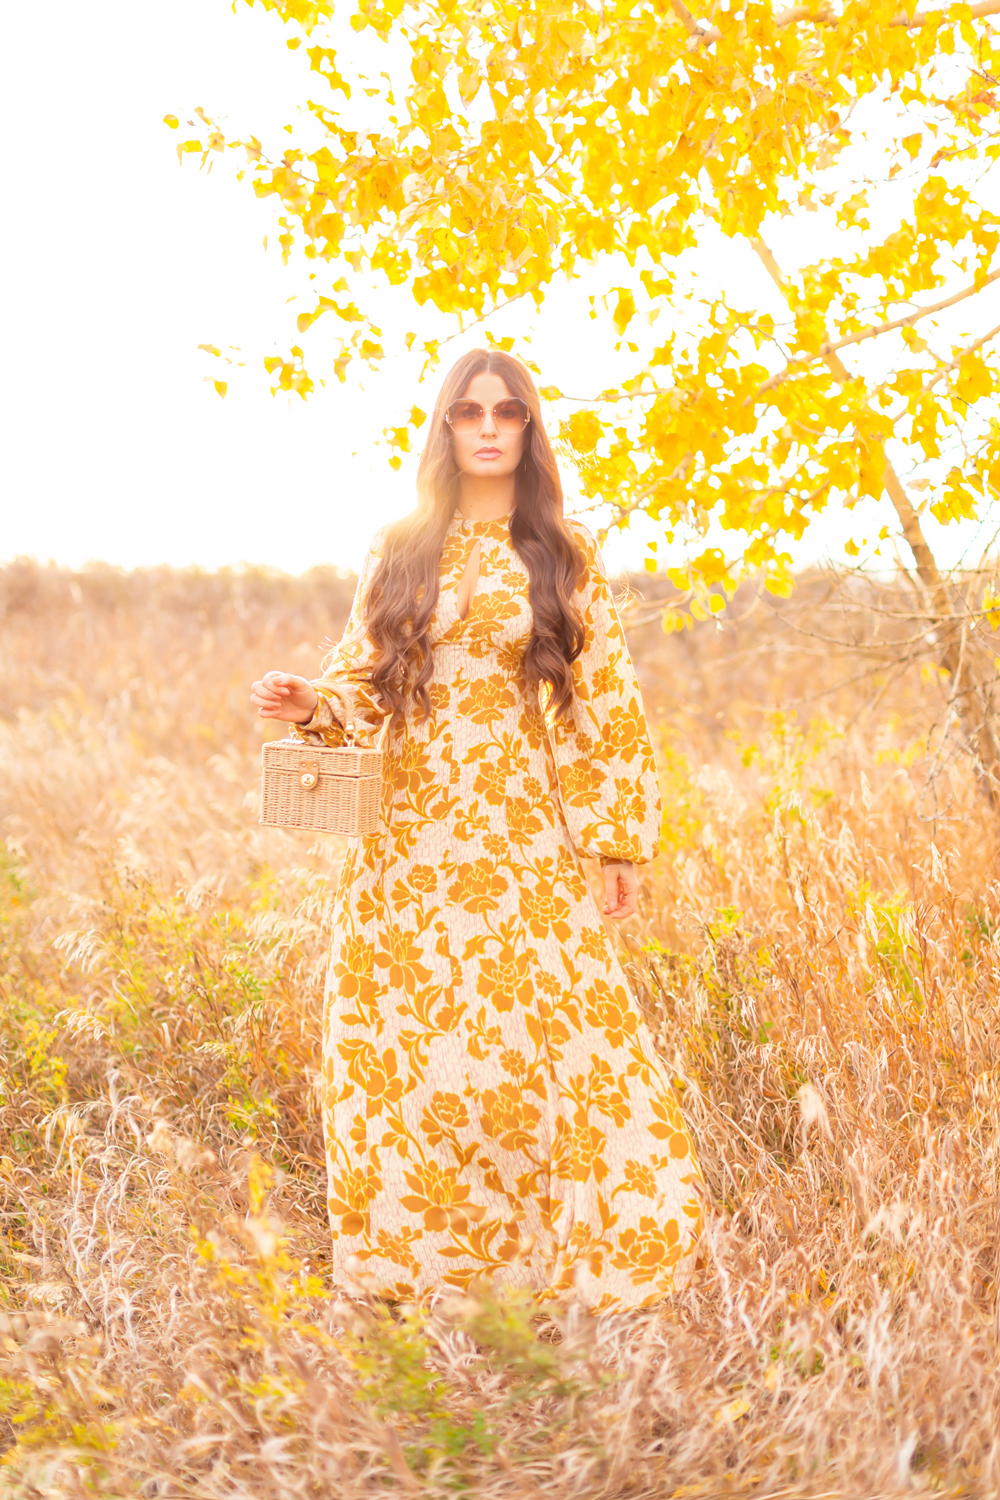 6 Luxe Bohemian Fall Outfits | Autumnal Ochre | Brunette woman wearing a fall floral printed ochre gown with long sleeves and oversized ombre retro inspired sunglasses amongst golden grasses and yellow leaves | | Boho Fall 2022 Outfit Ideas | Classic Fall Outfit Formulas | Feminine Bohemian Style | Polished Bohemian Style | Elegant Bohemian Style | Bohemian Outfit Ideas | Calgary Alberta Fashion Blogger // JustineCelina.com